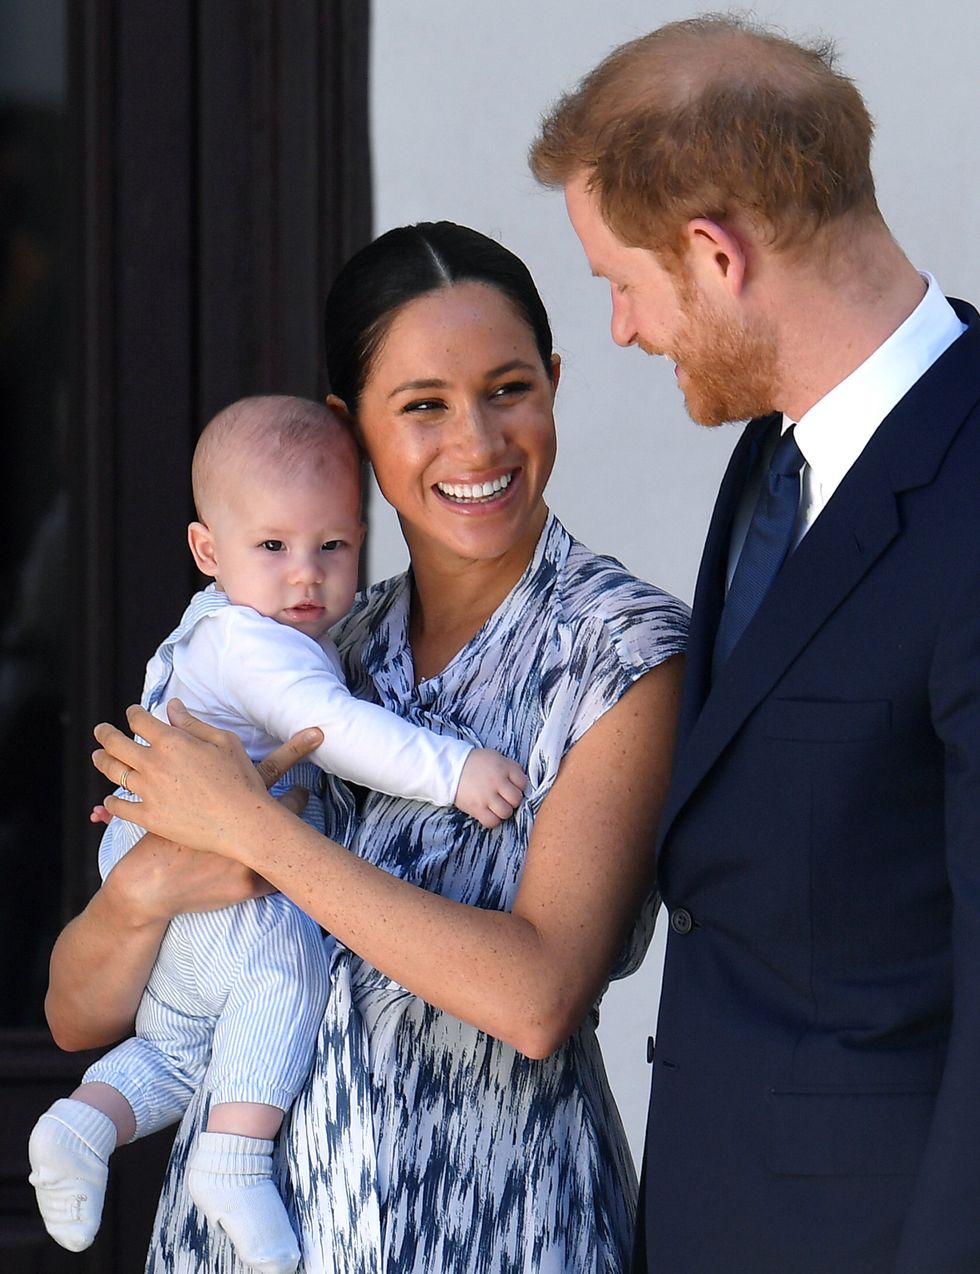 baby archie, zuid afrika archie, meghan markle, prins harry